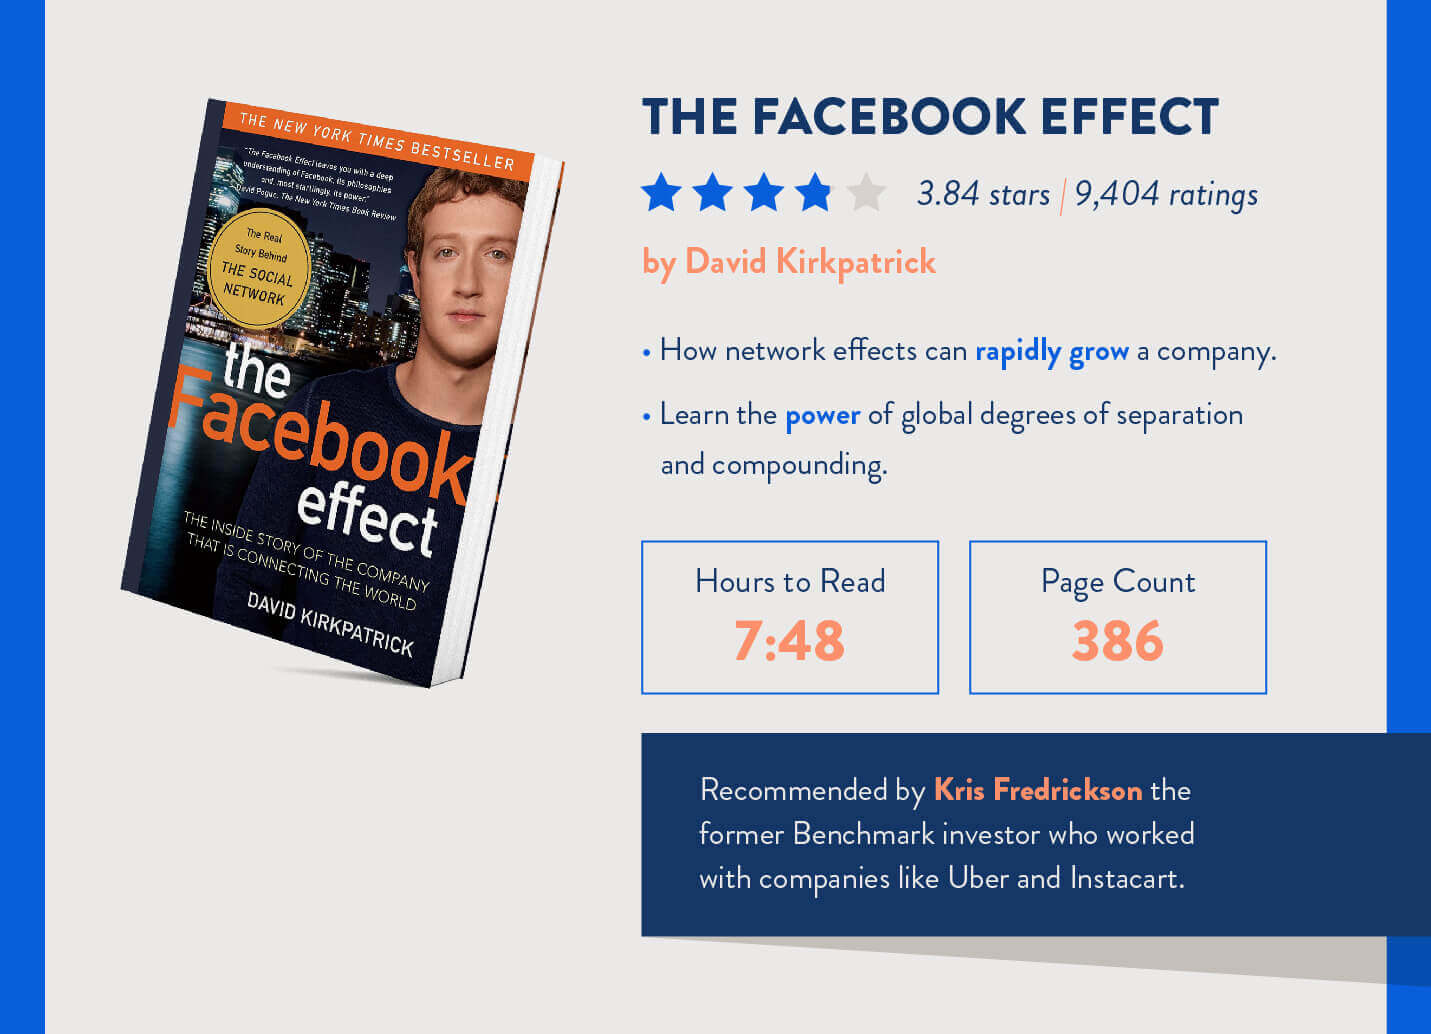 the facebook effect book mobile marketers should read with time it takes and page counts